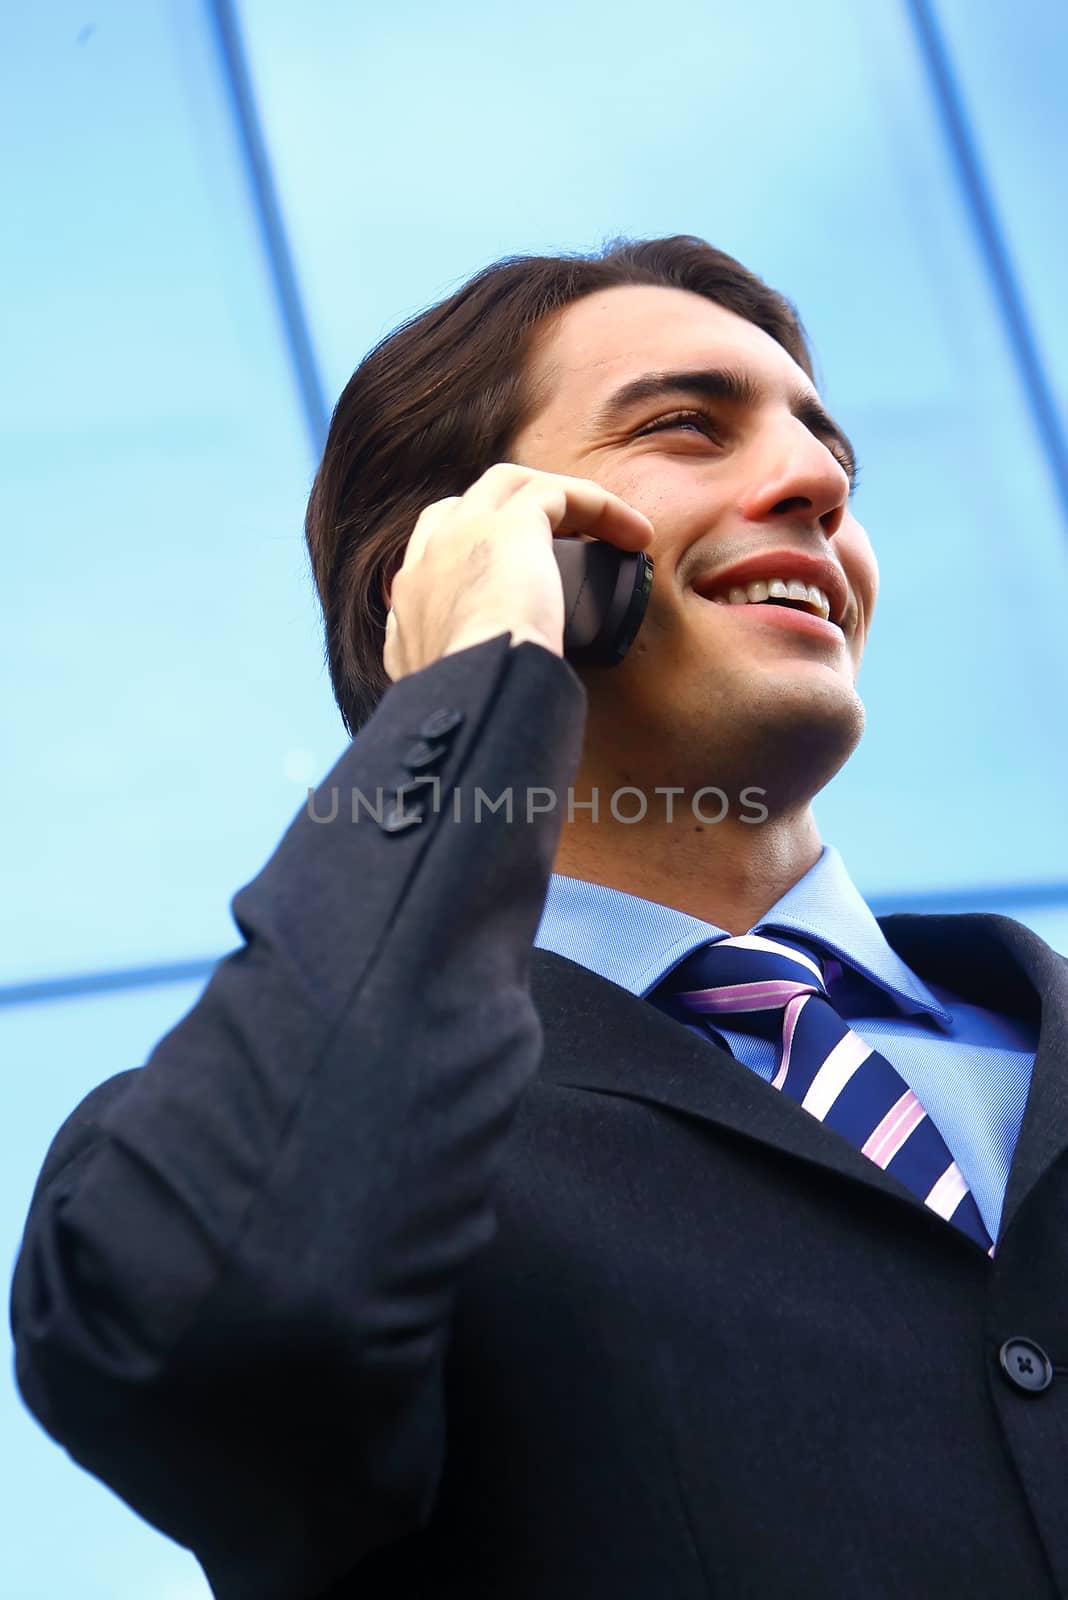 businessman speaking on the telephone against an office building 